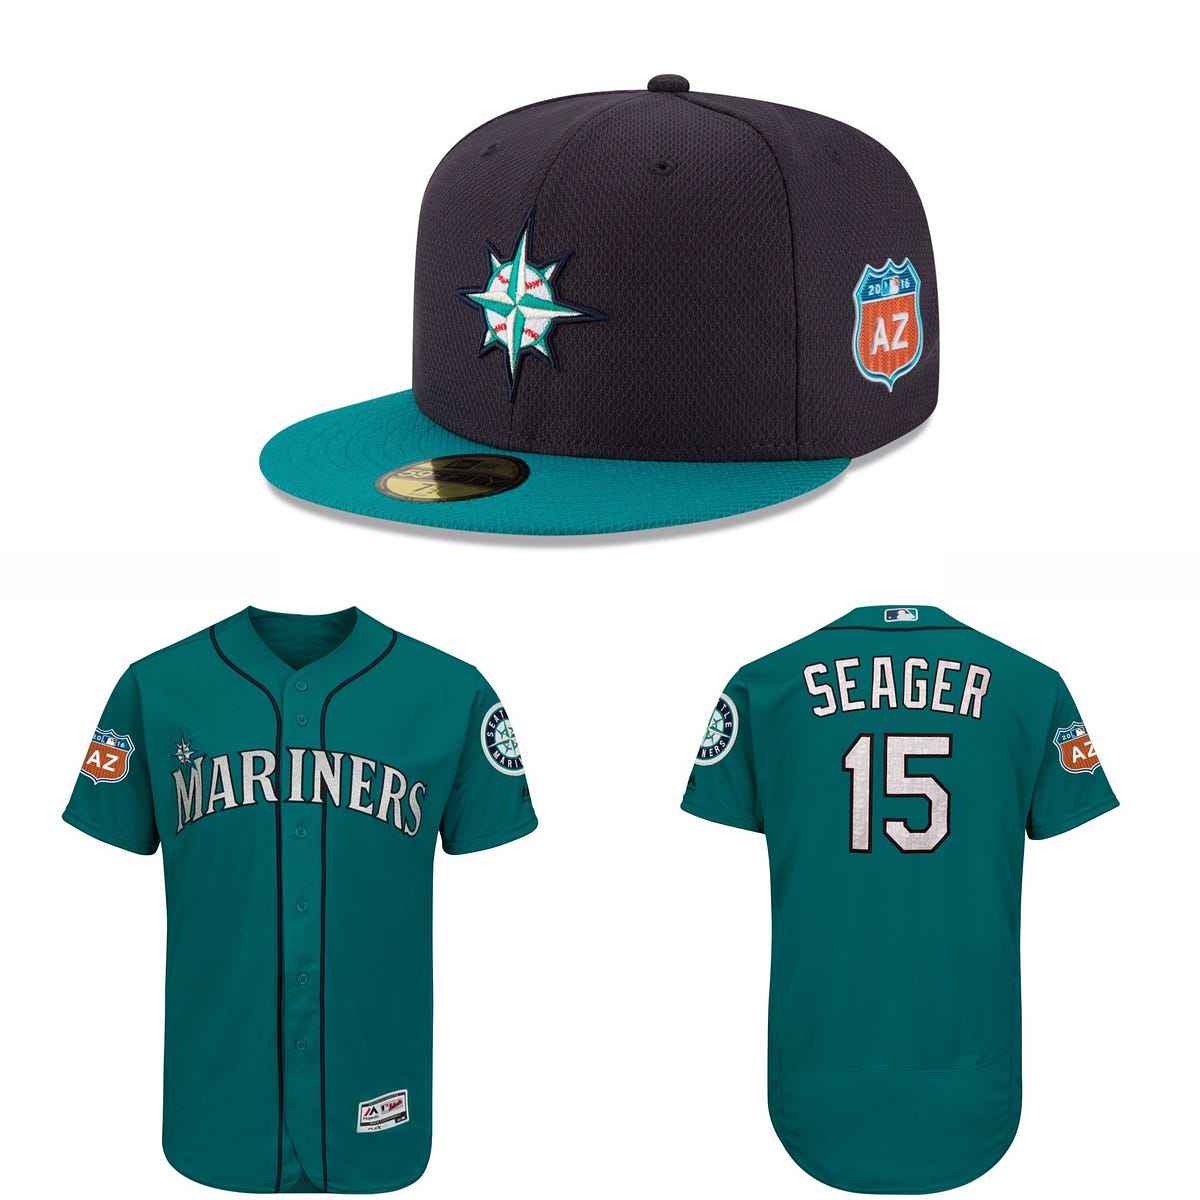 Mariners New Spring Training Cap. The Mariners are one of seven MLB teams…, by Mariners PR